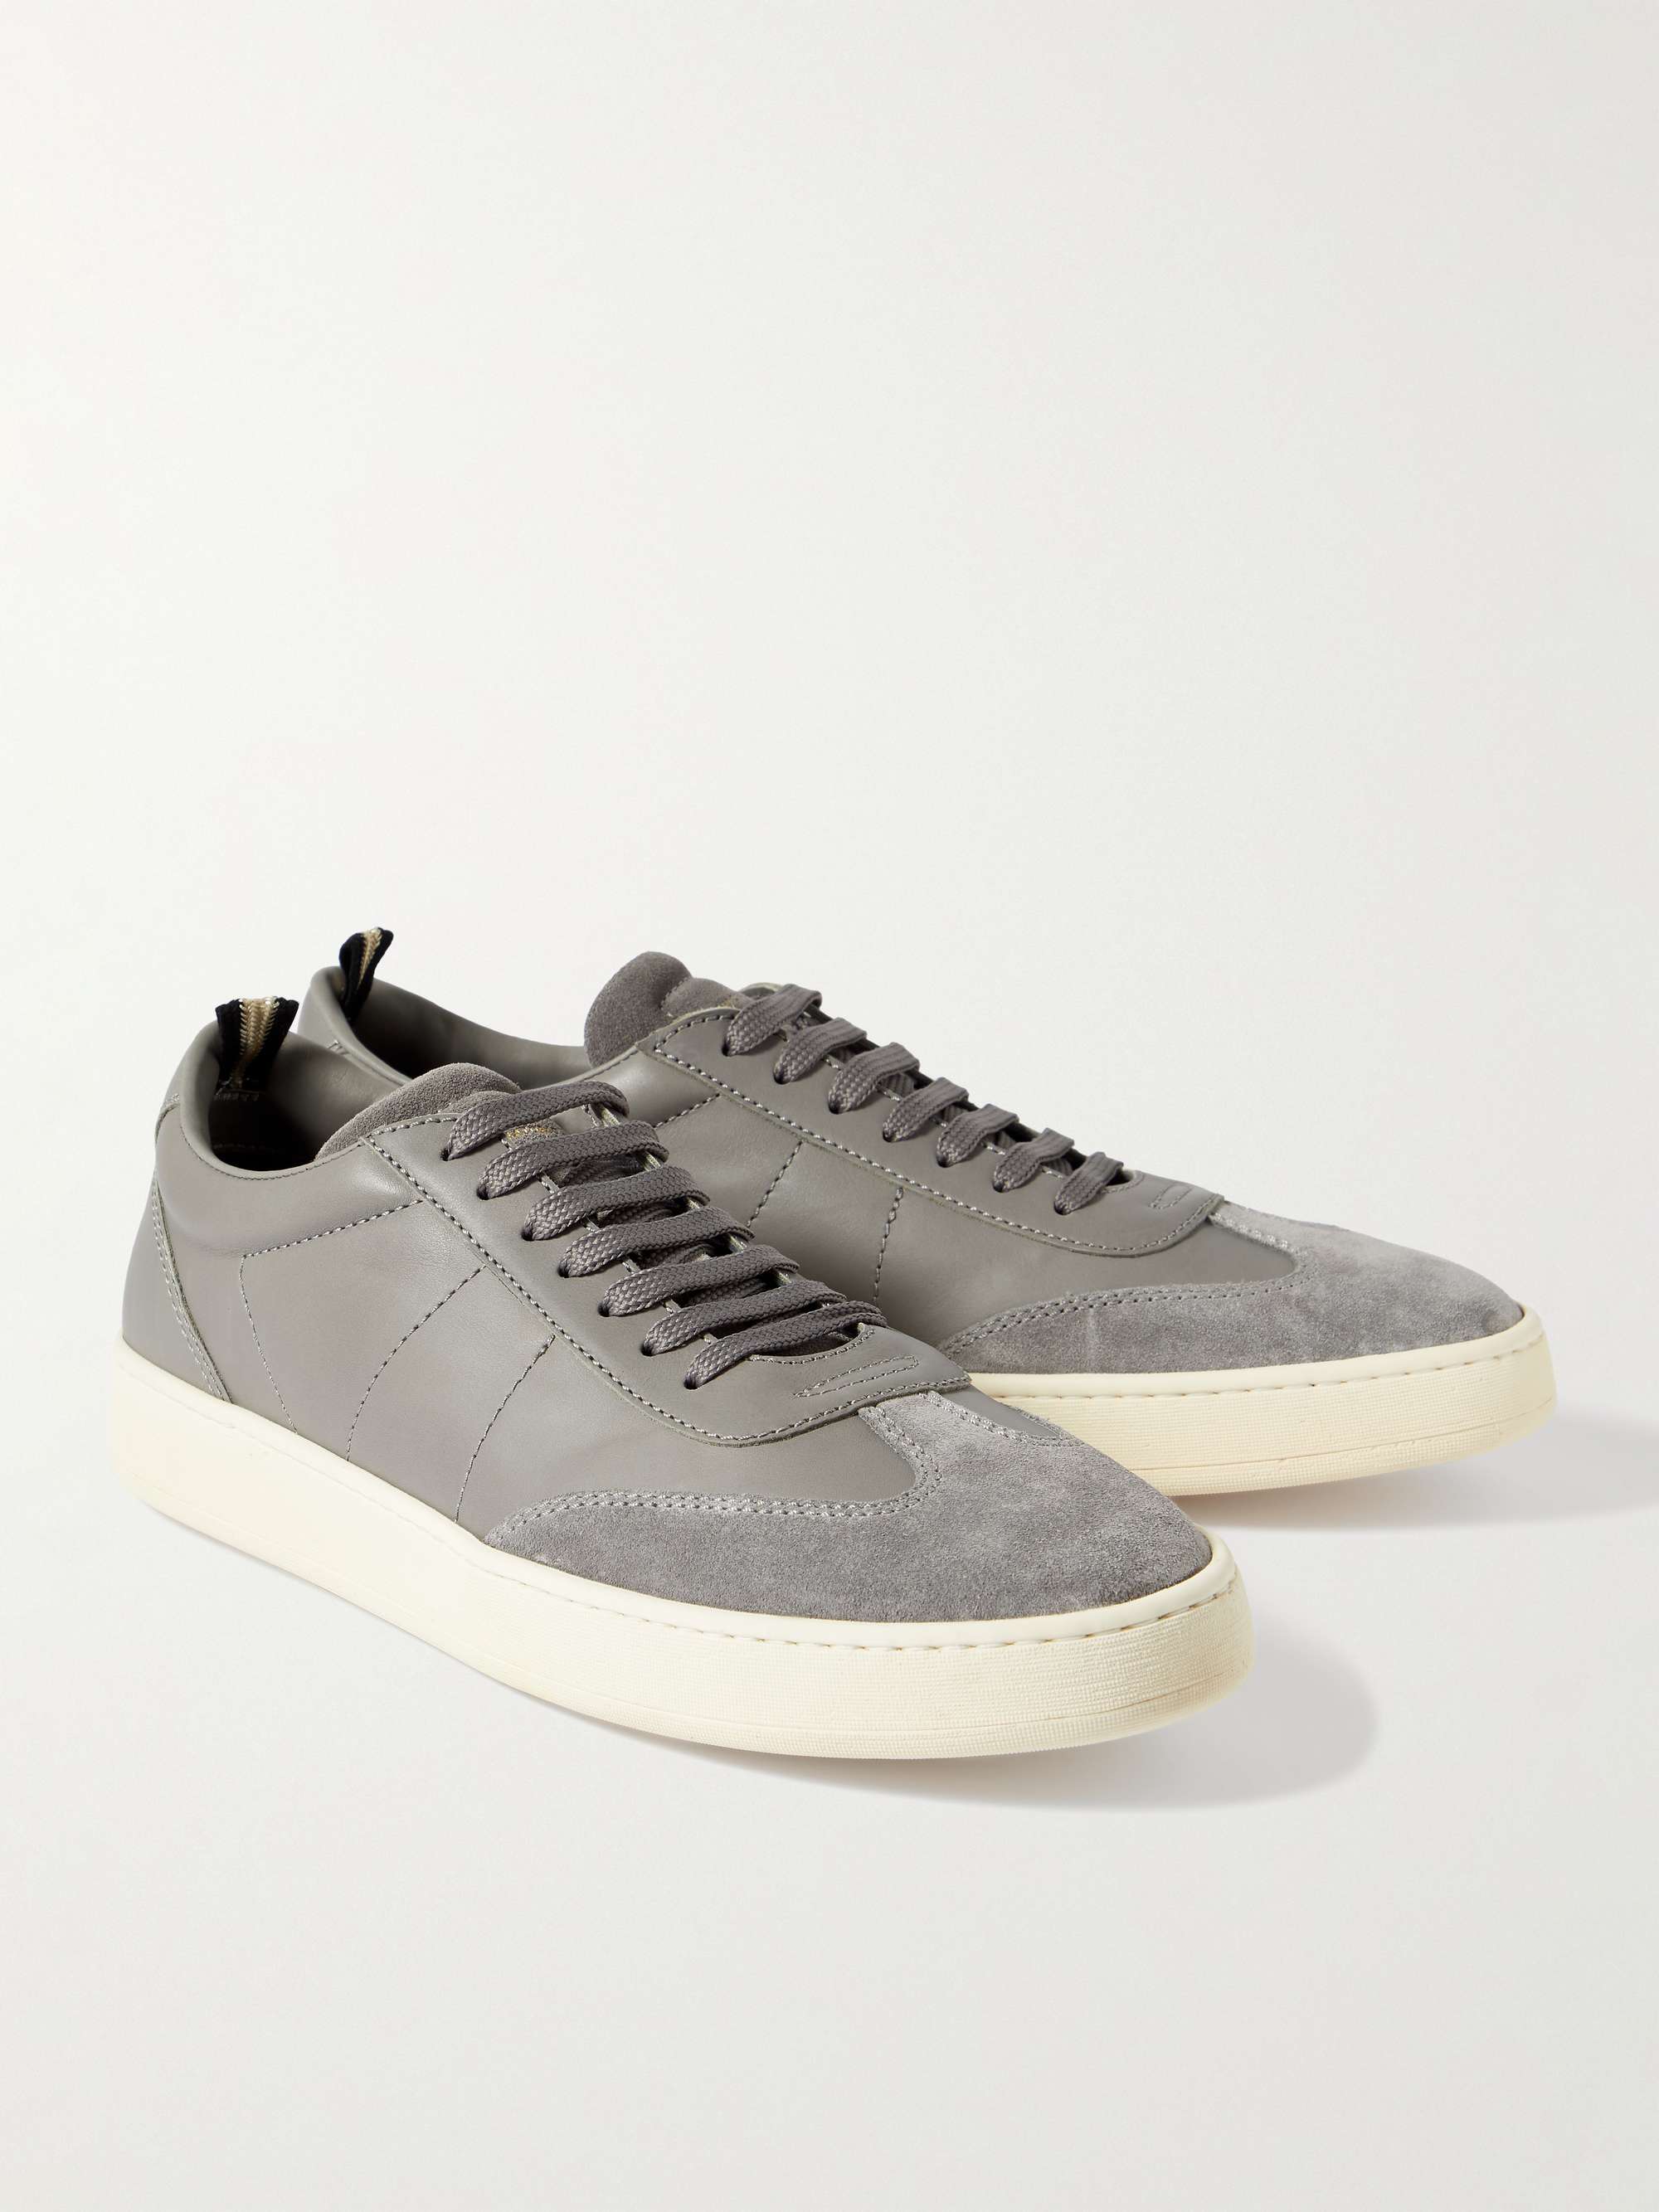 OFFICINE CREATIVE Kombo Suede-Trimmed Leather Sneakers for Men | MR PORTER